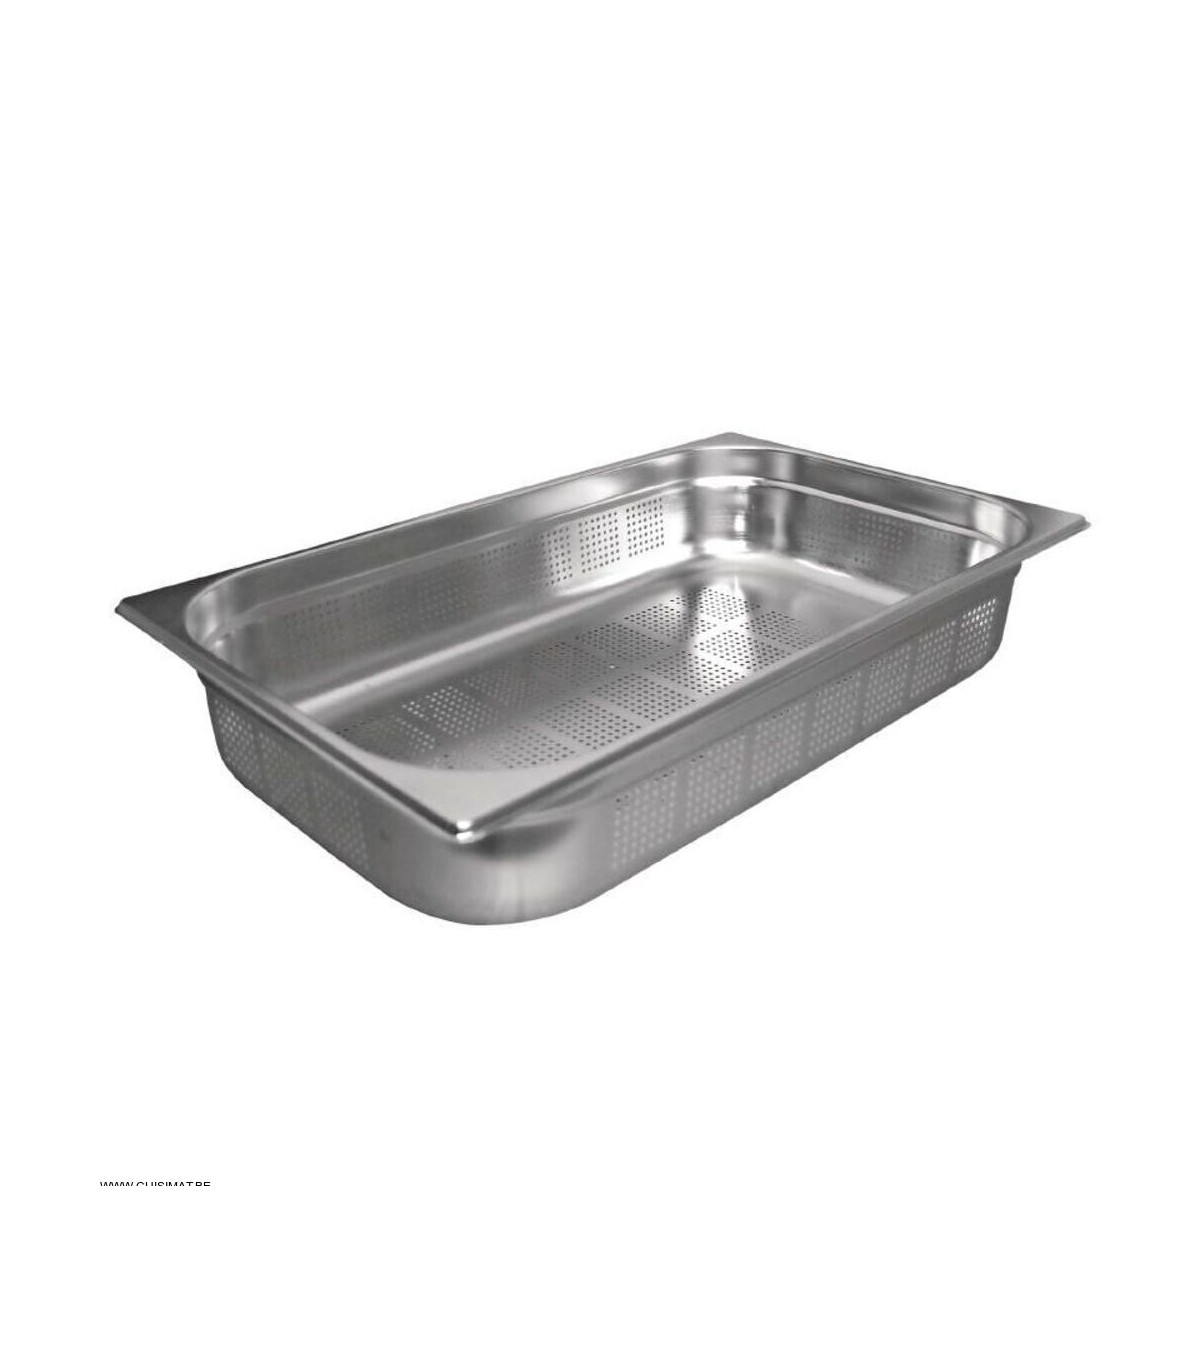 GN 1/1 PERFORE (325 * 530MM) 100 MM  VOGUE dans BACS GASTRONORM ANTI-ADHESIF